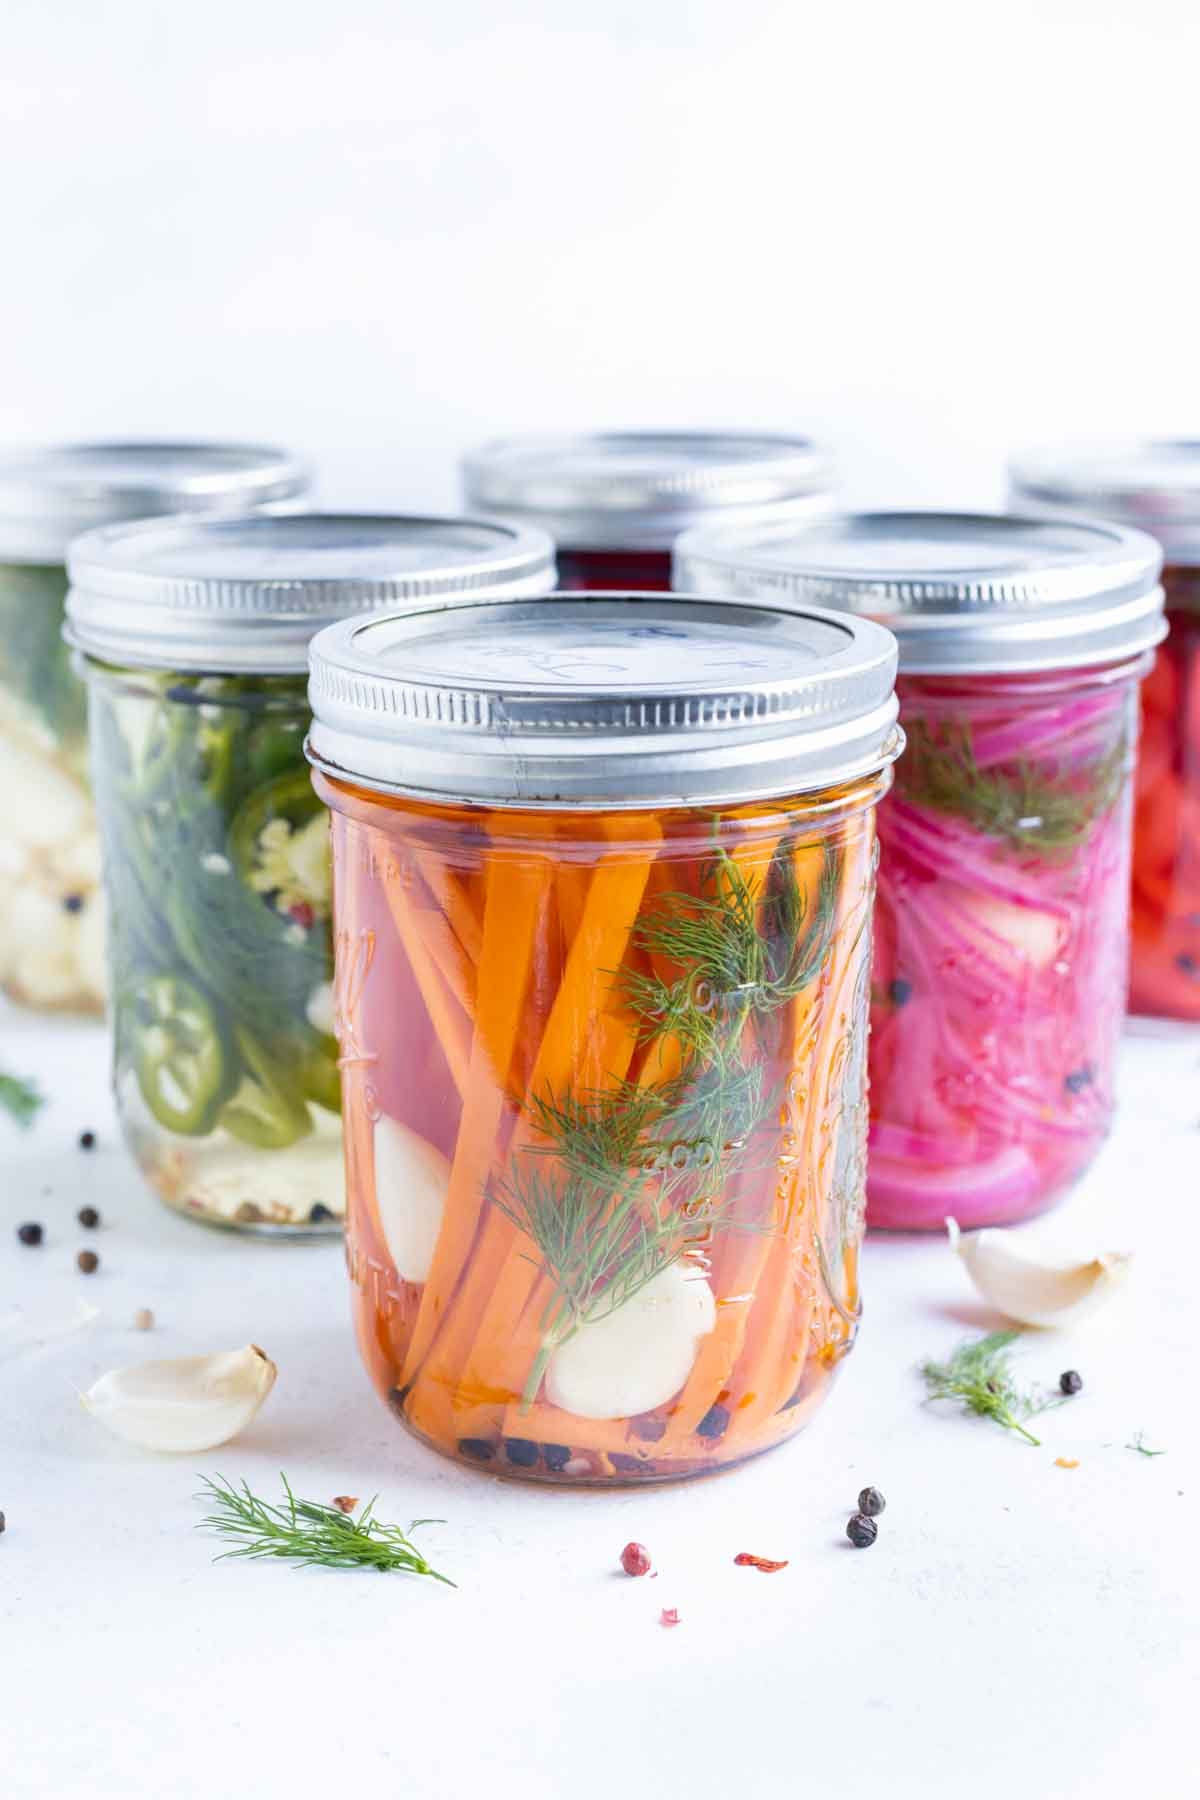 A collection of pickled vegetables in jars.